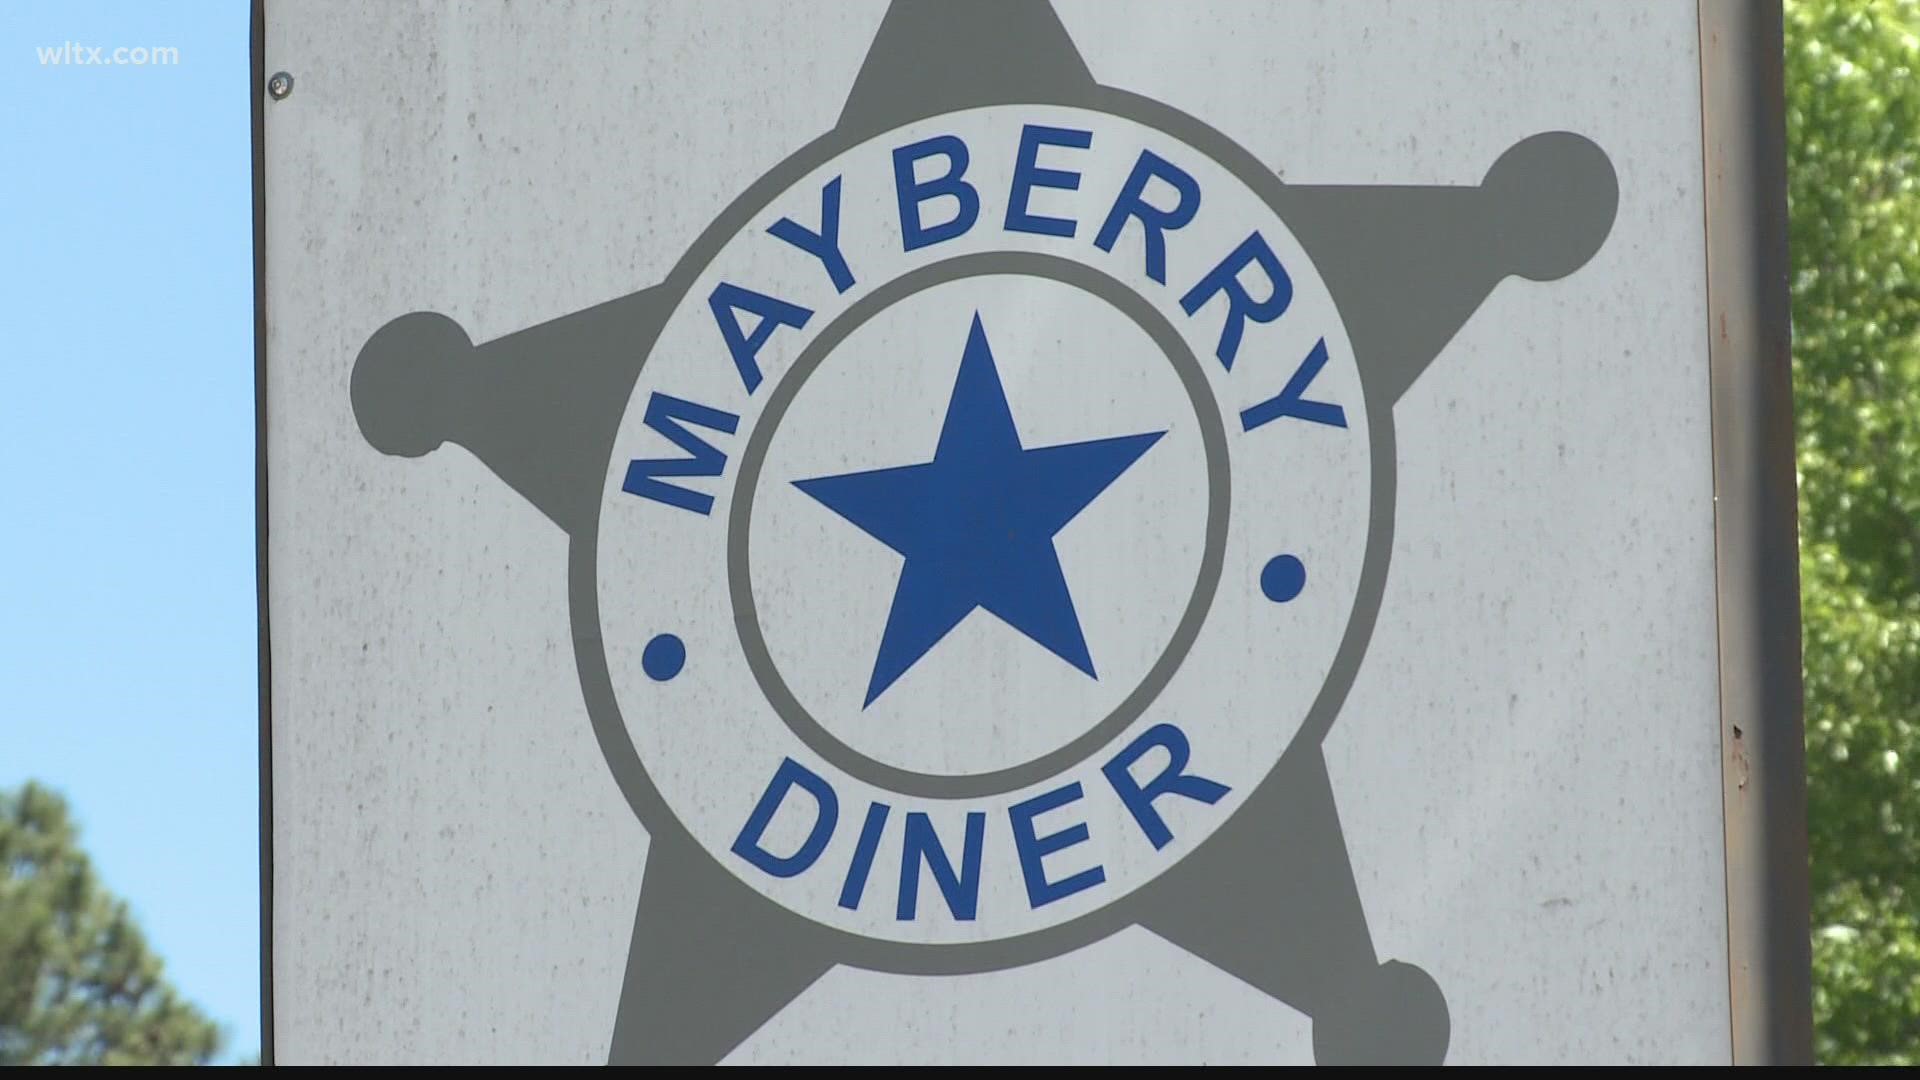 Located in the Laurens County town of Cross Hill, the restaurant is filled with Mayberry memorabilia, along with pictures of the show's cast.